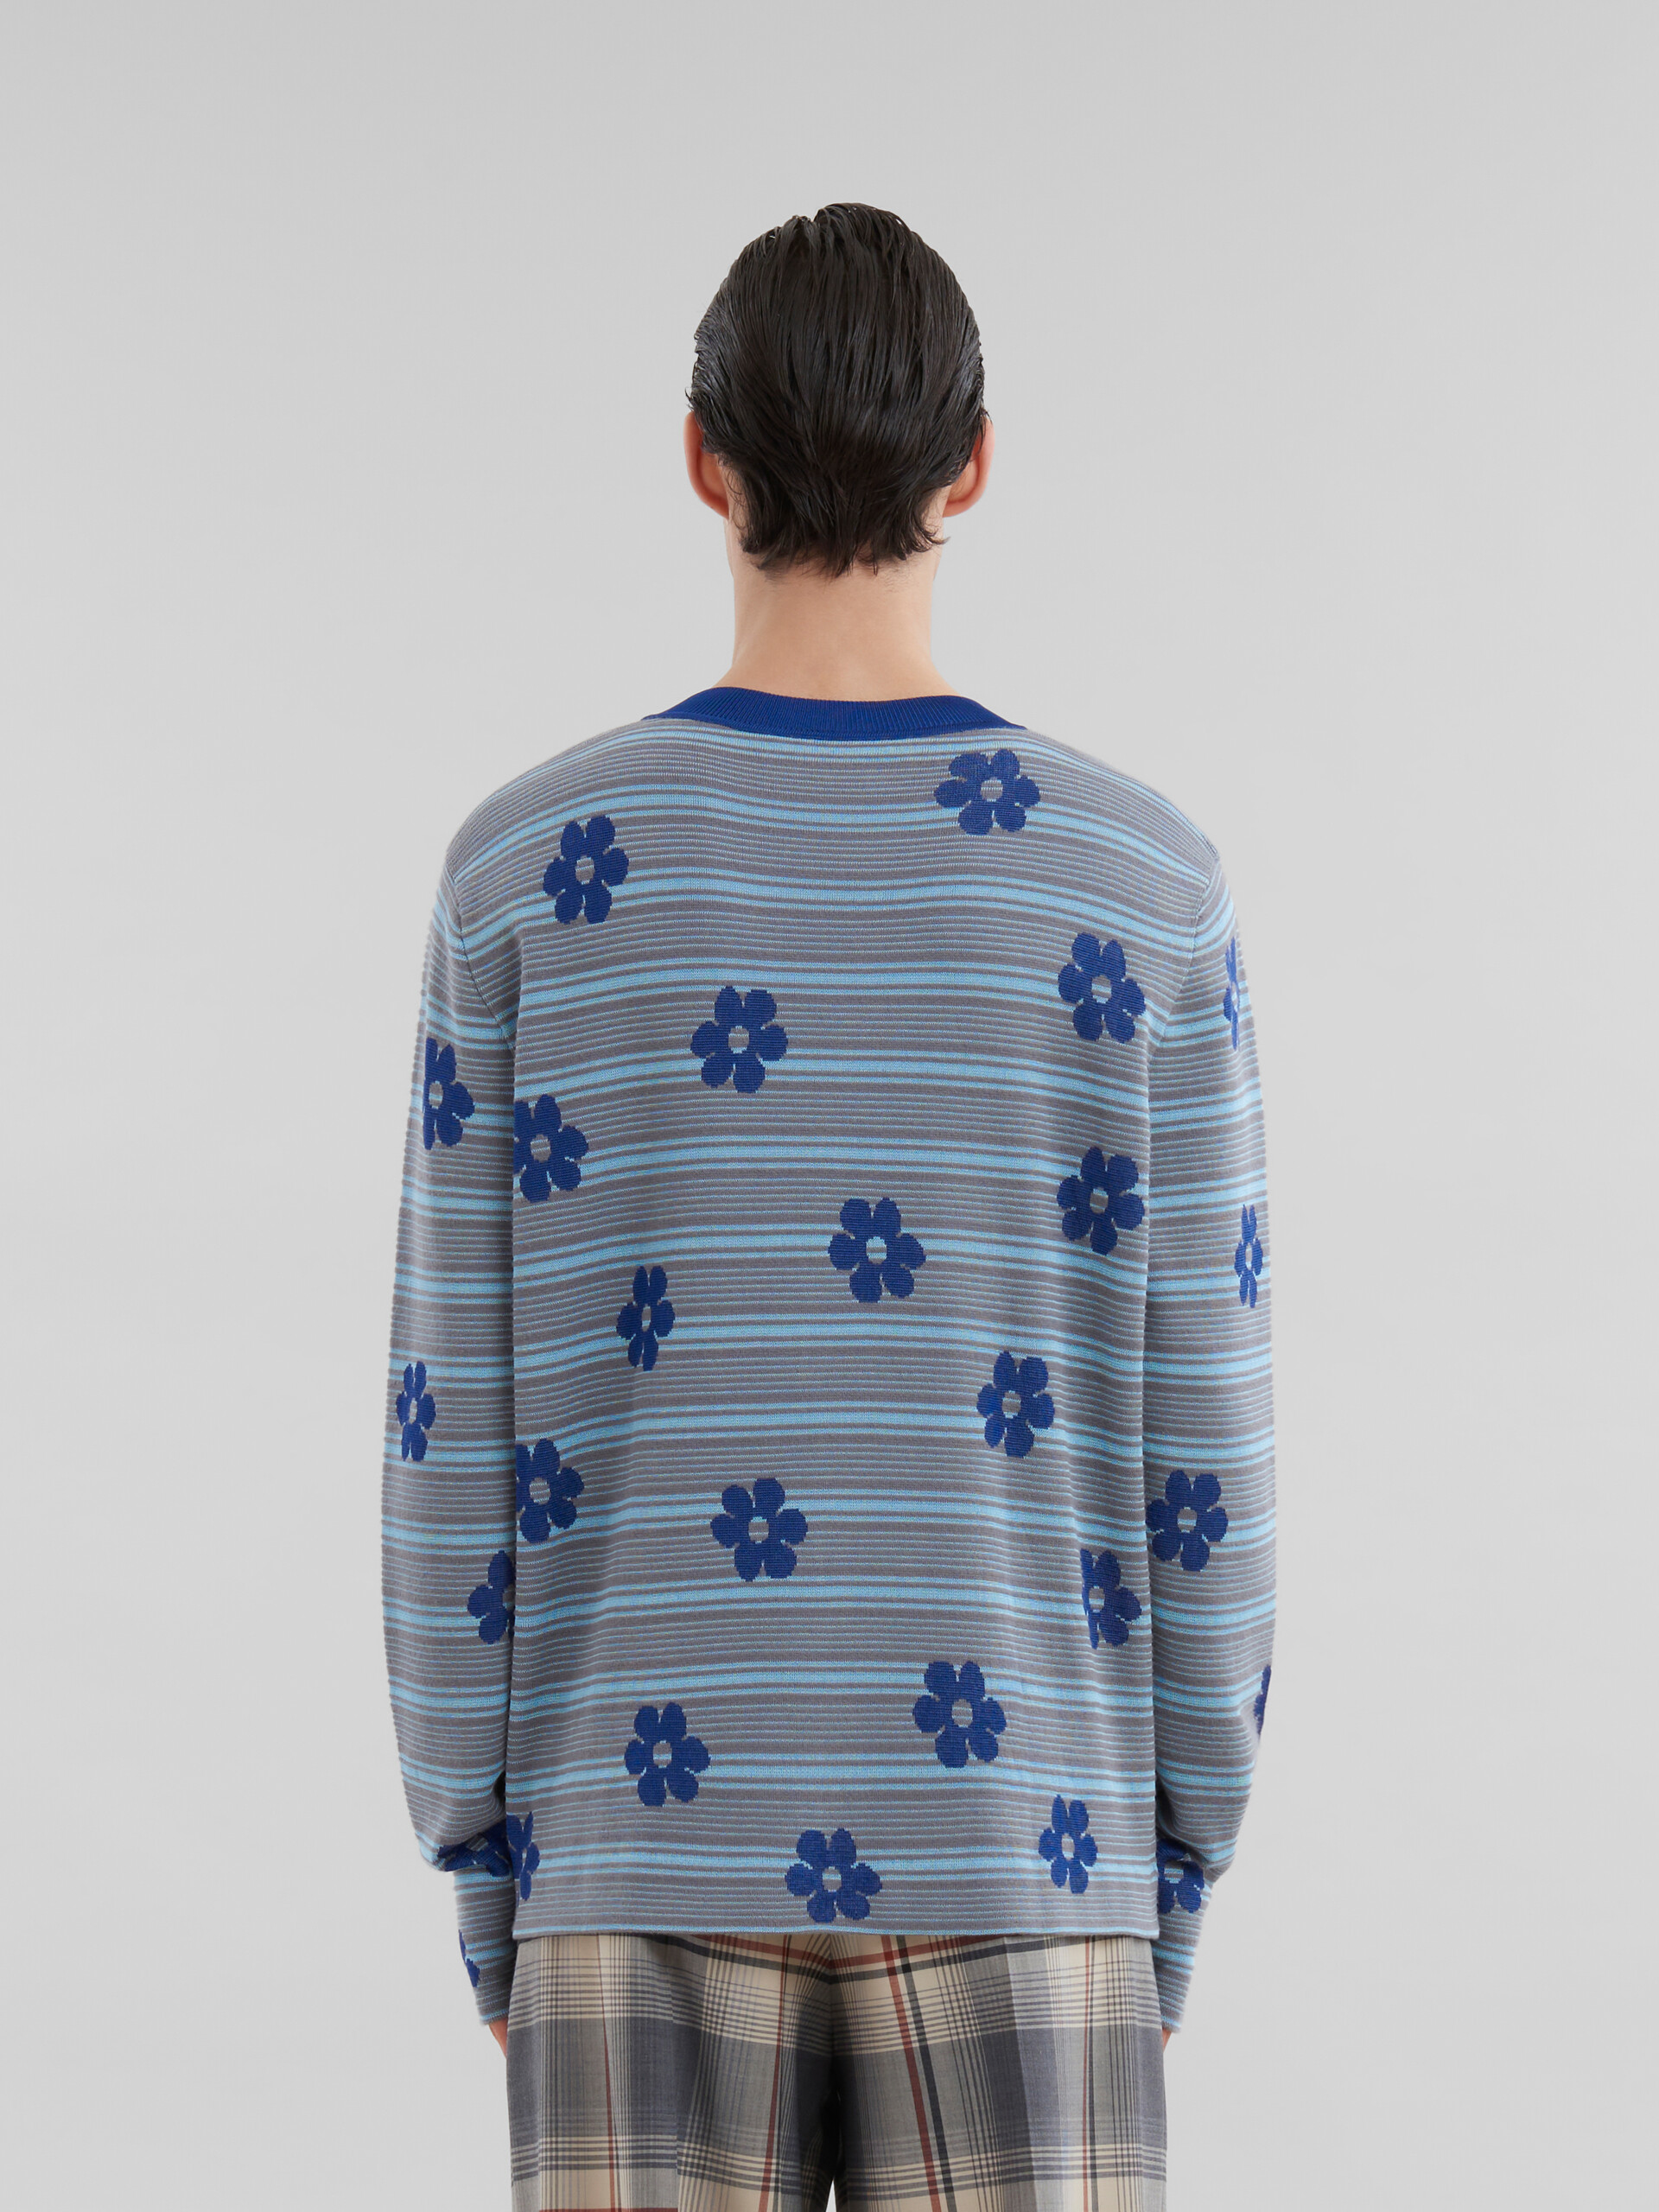 Blue cotton-viscose striped jumper with floral motif - Pullovers - Image 3